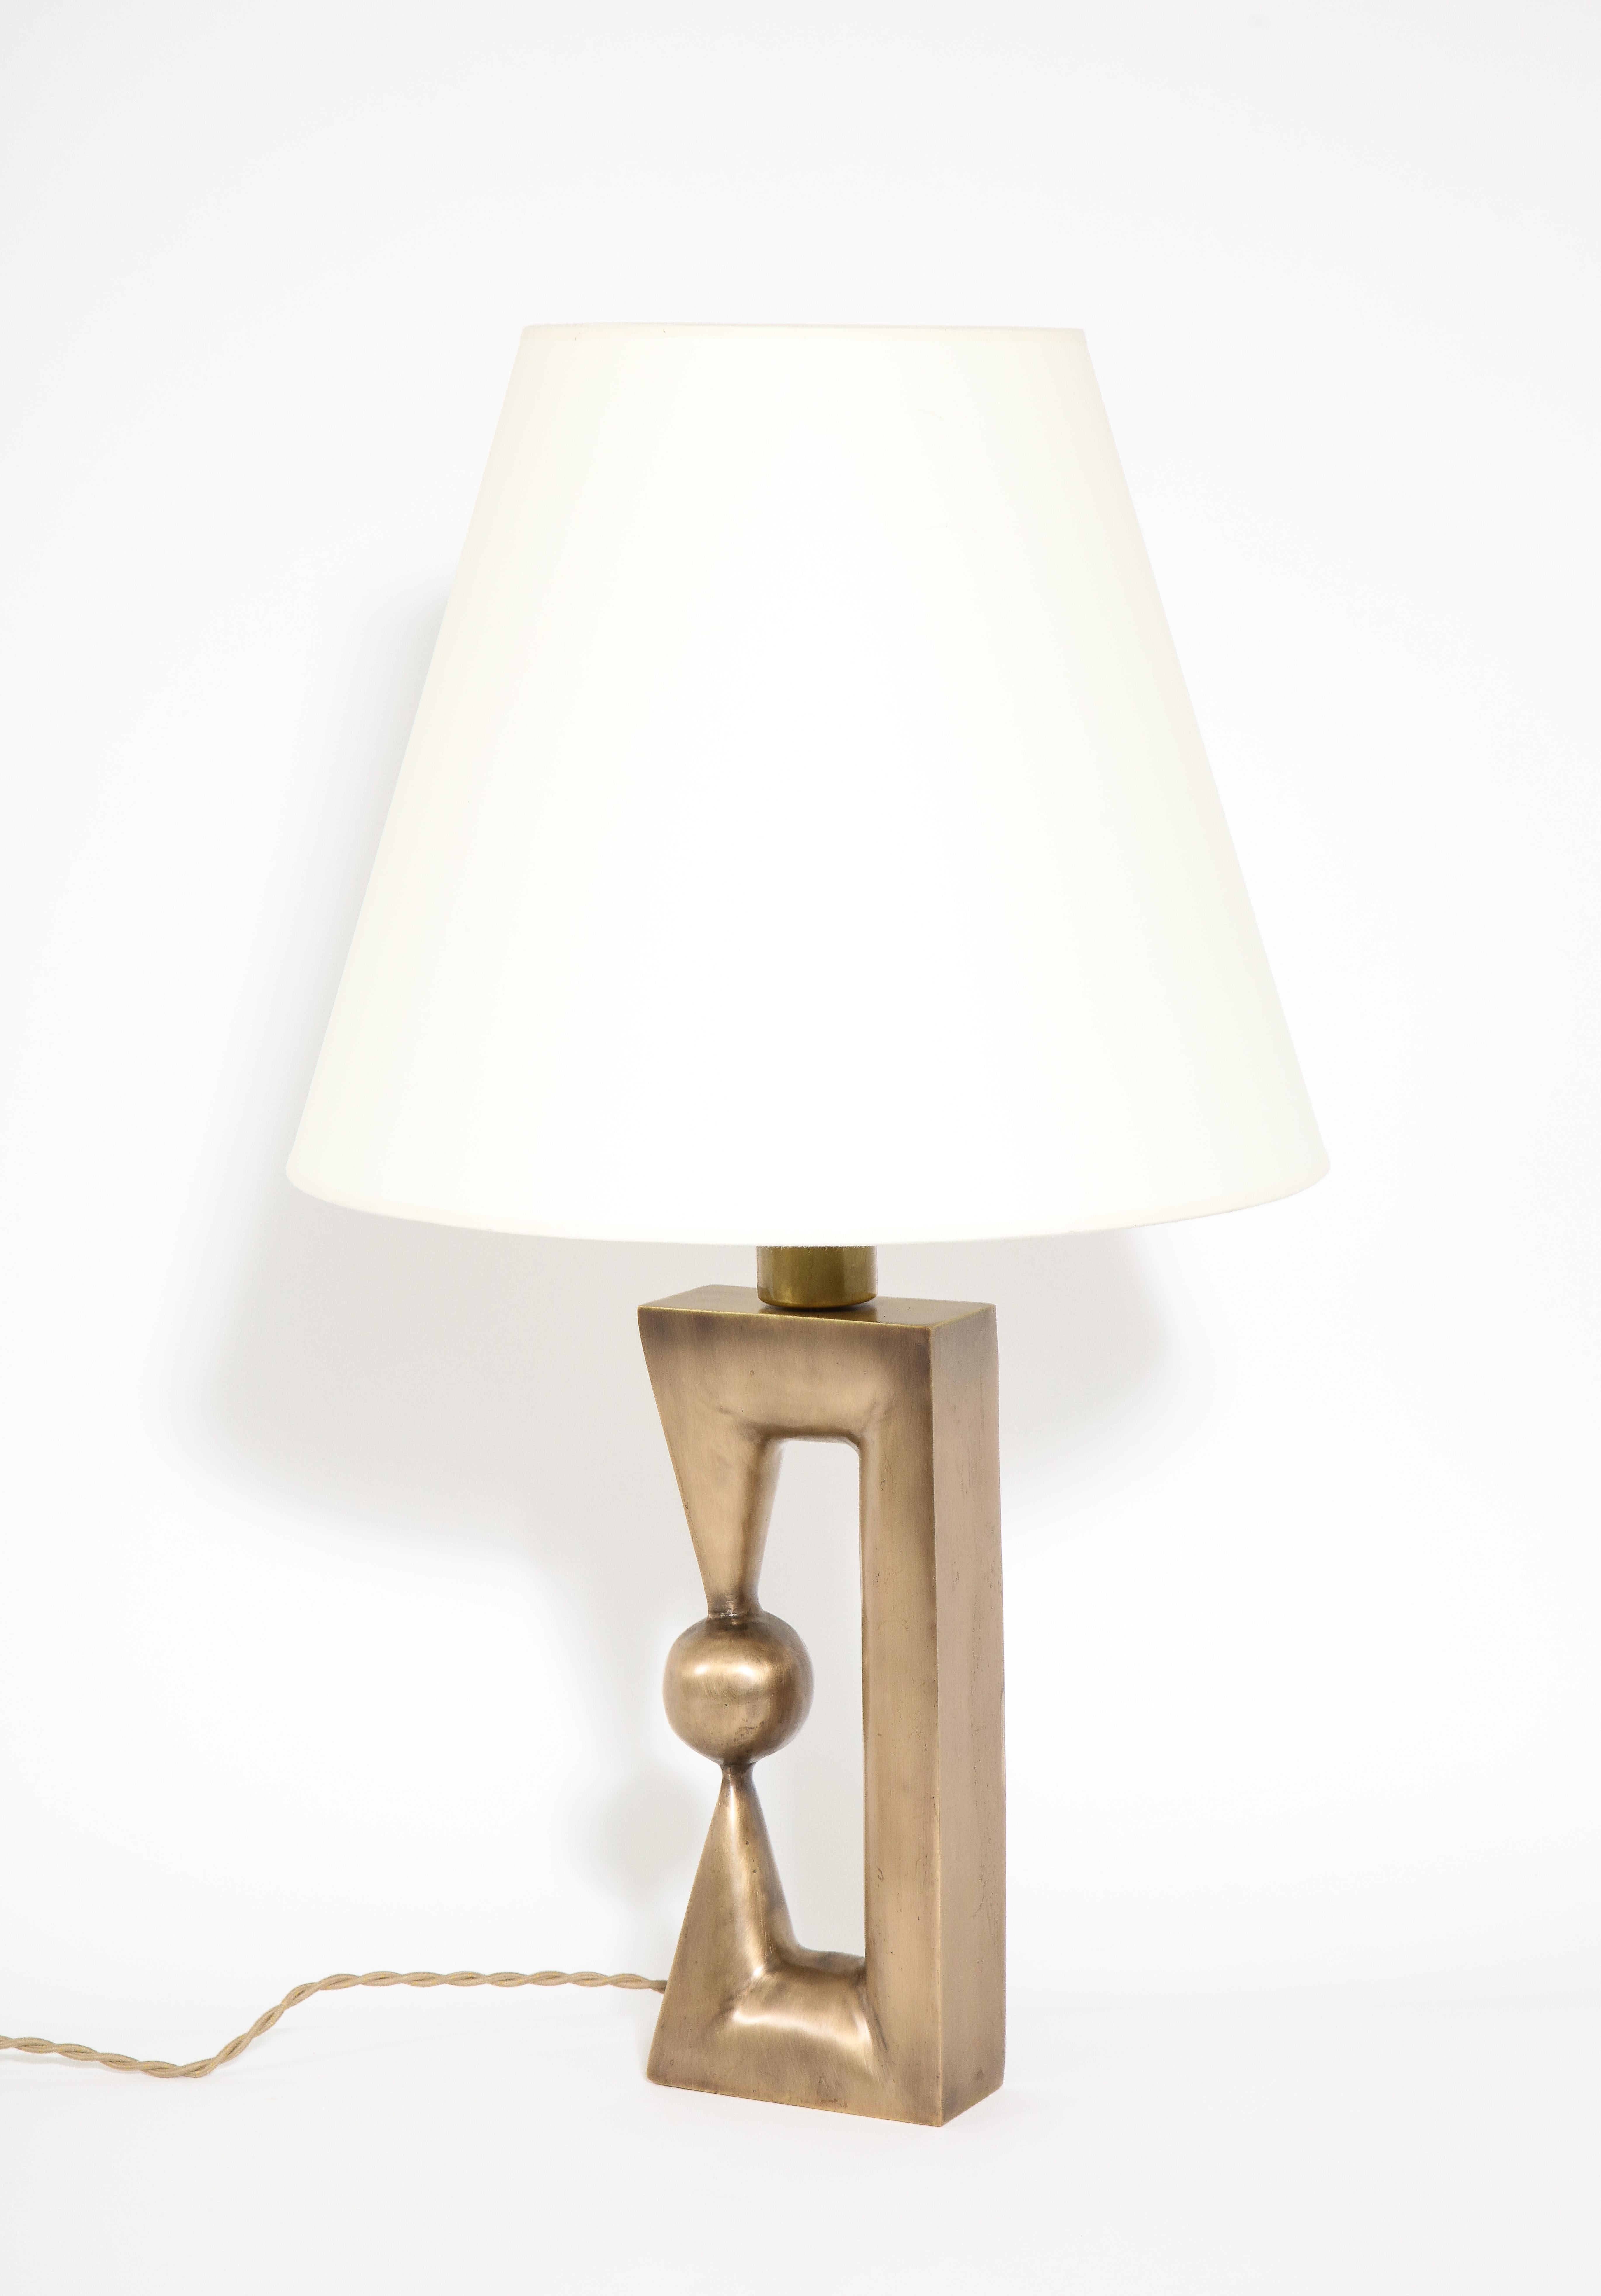 made in usa table lamps